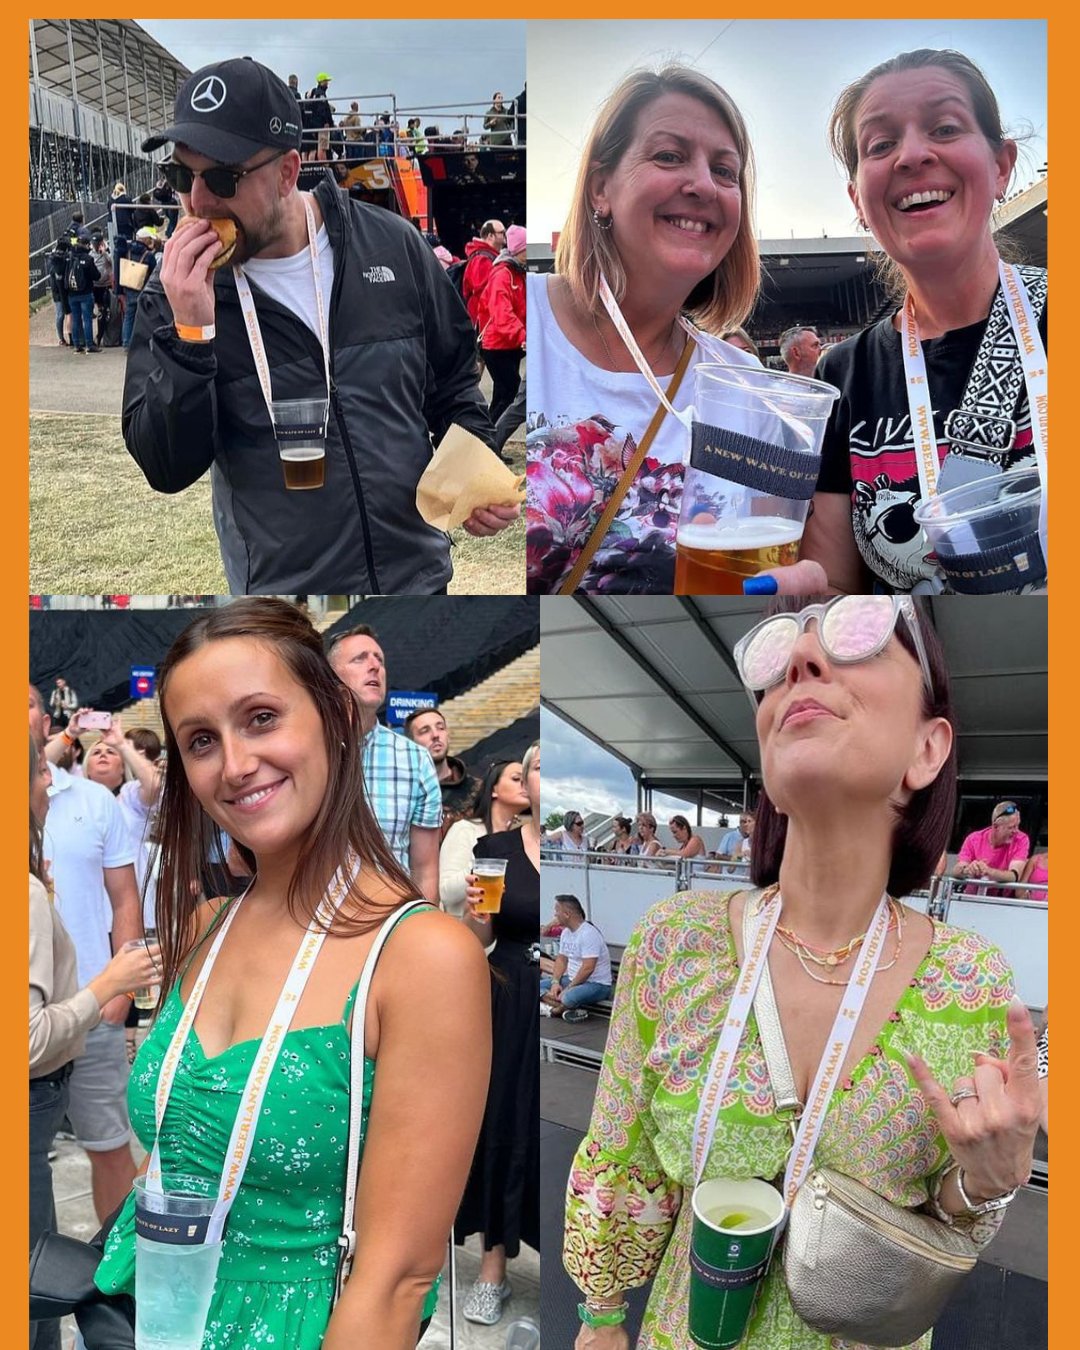 Are you attending a beer festival near you? Why not take a Beer Lanyard and go hands-free? - Beer Lanyard